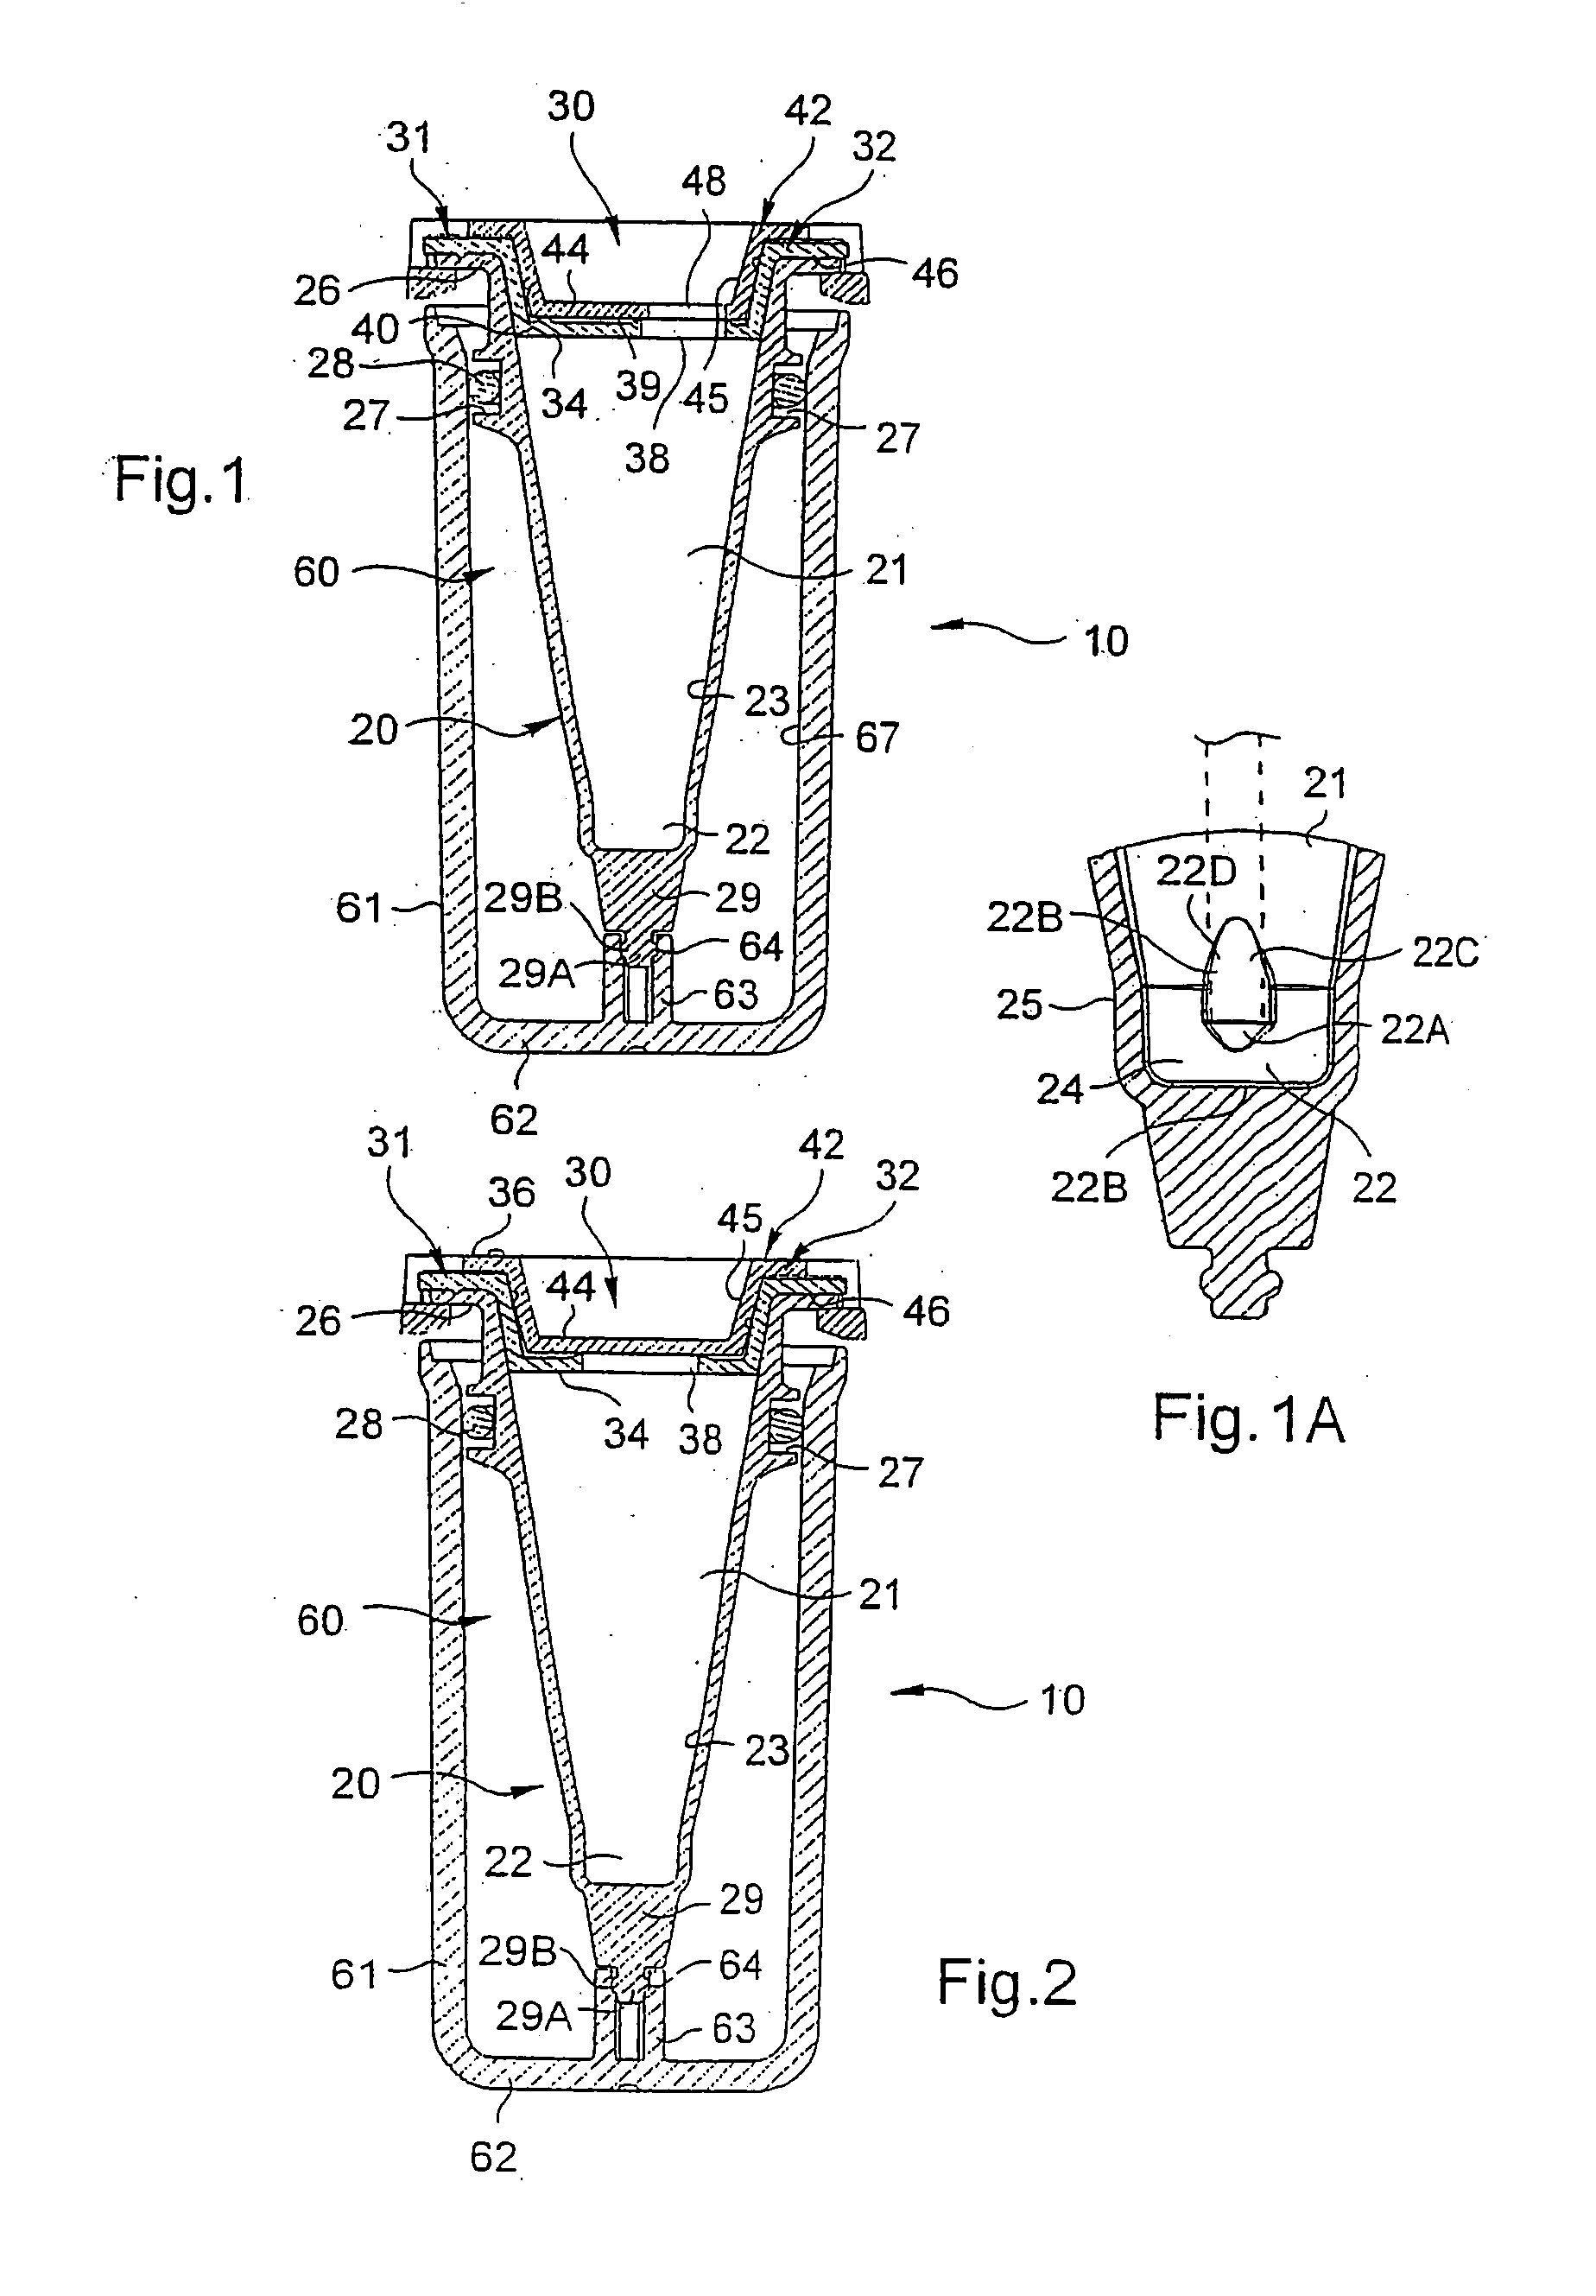 Incubation and/or stroage container system and method